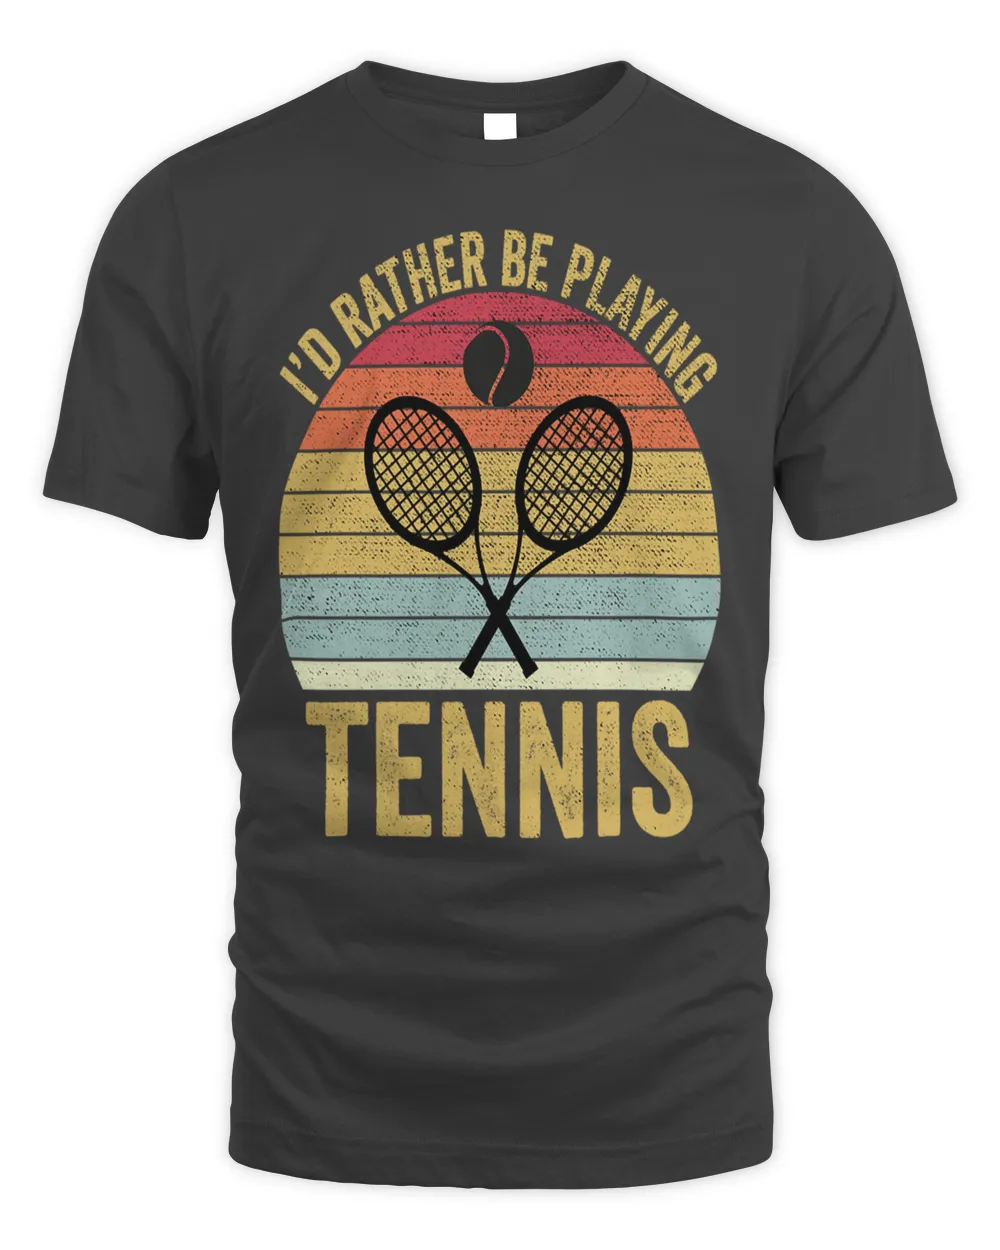 I'd rather be playing tennis racket